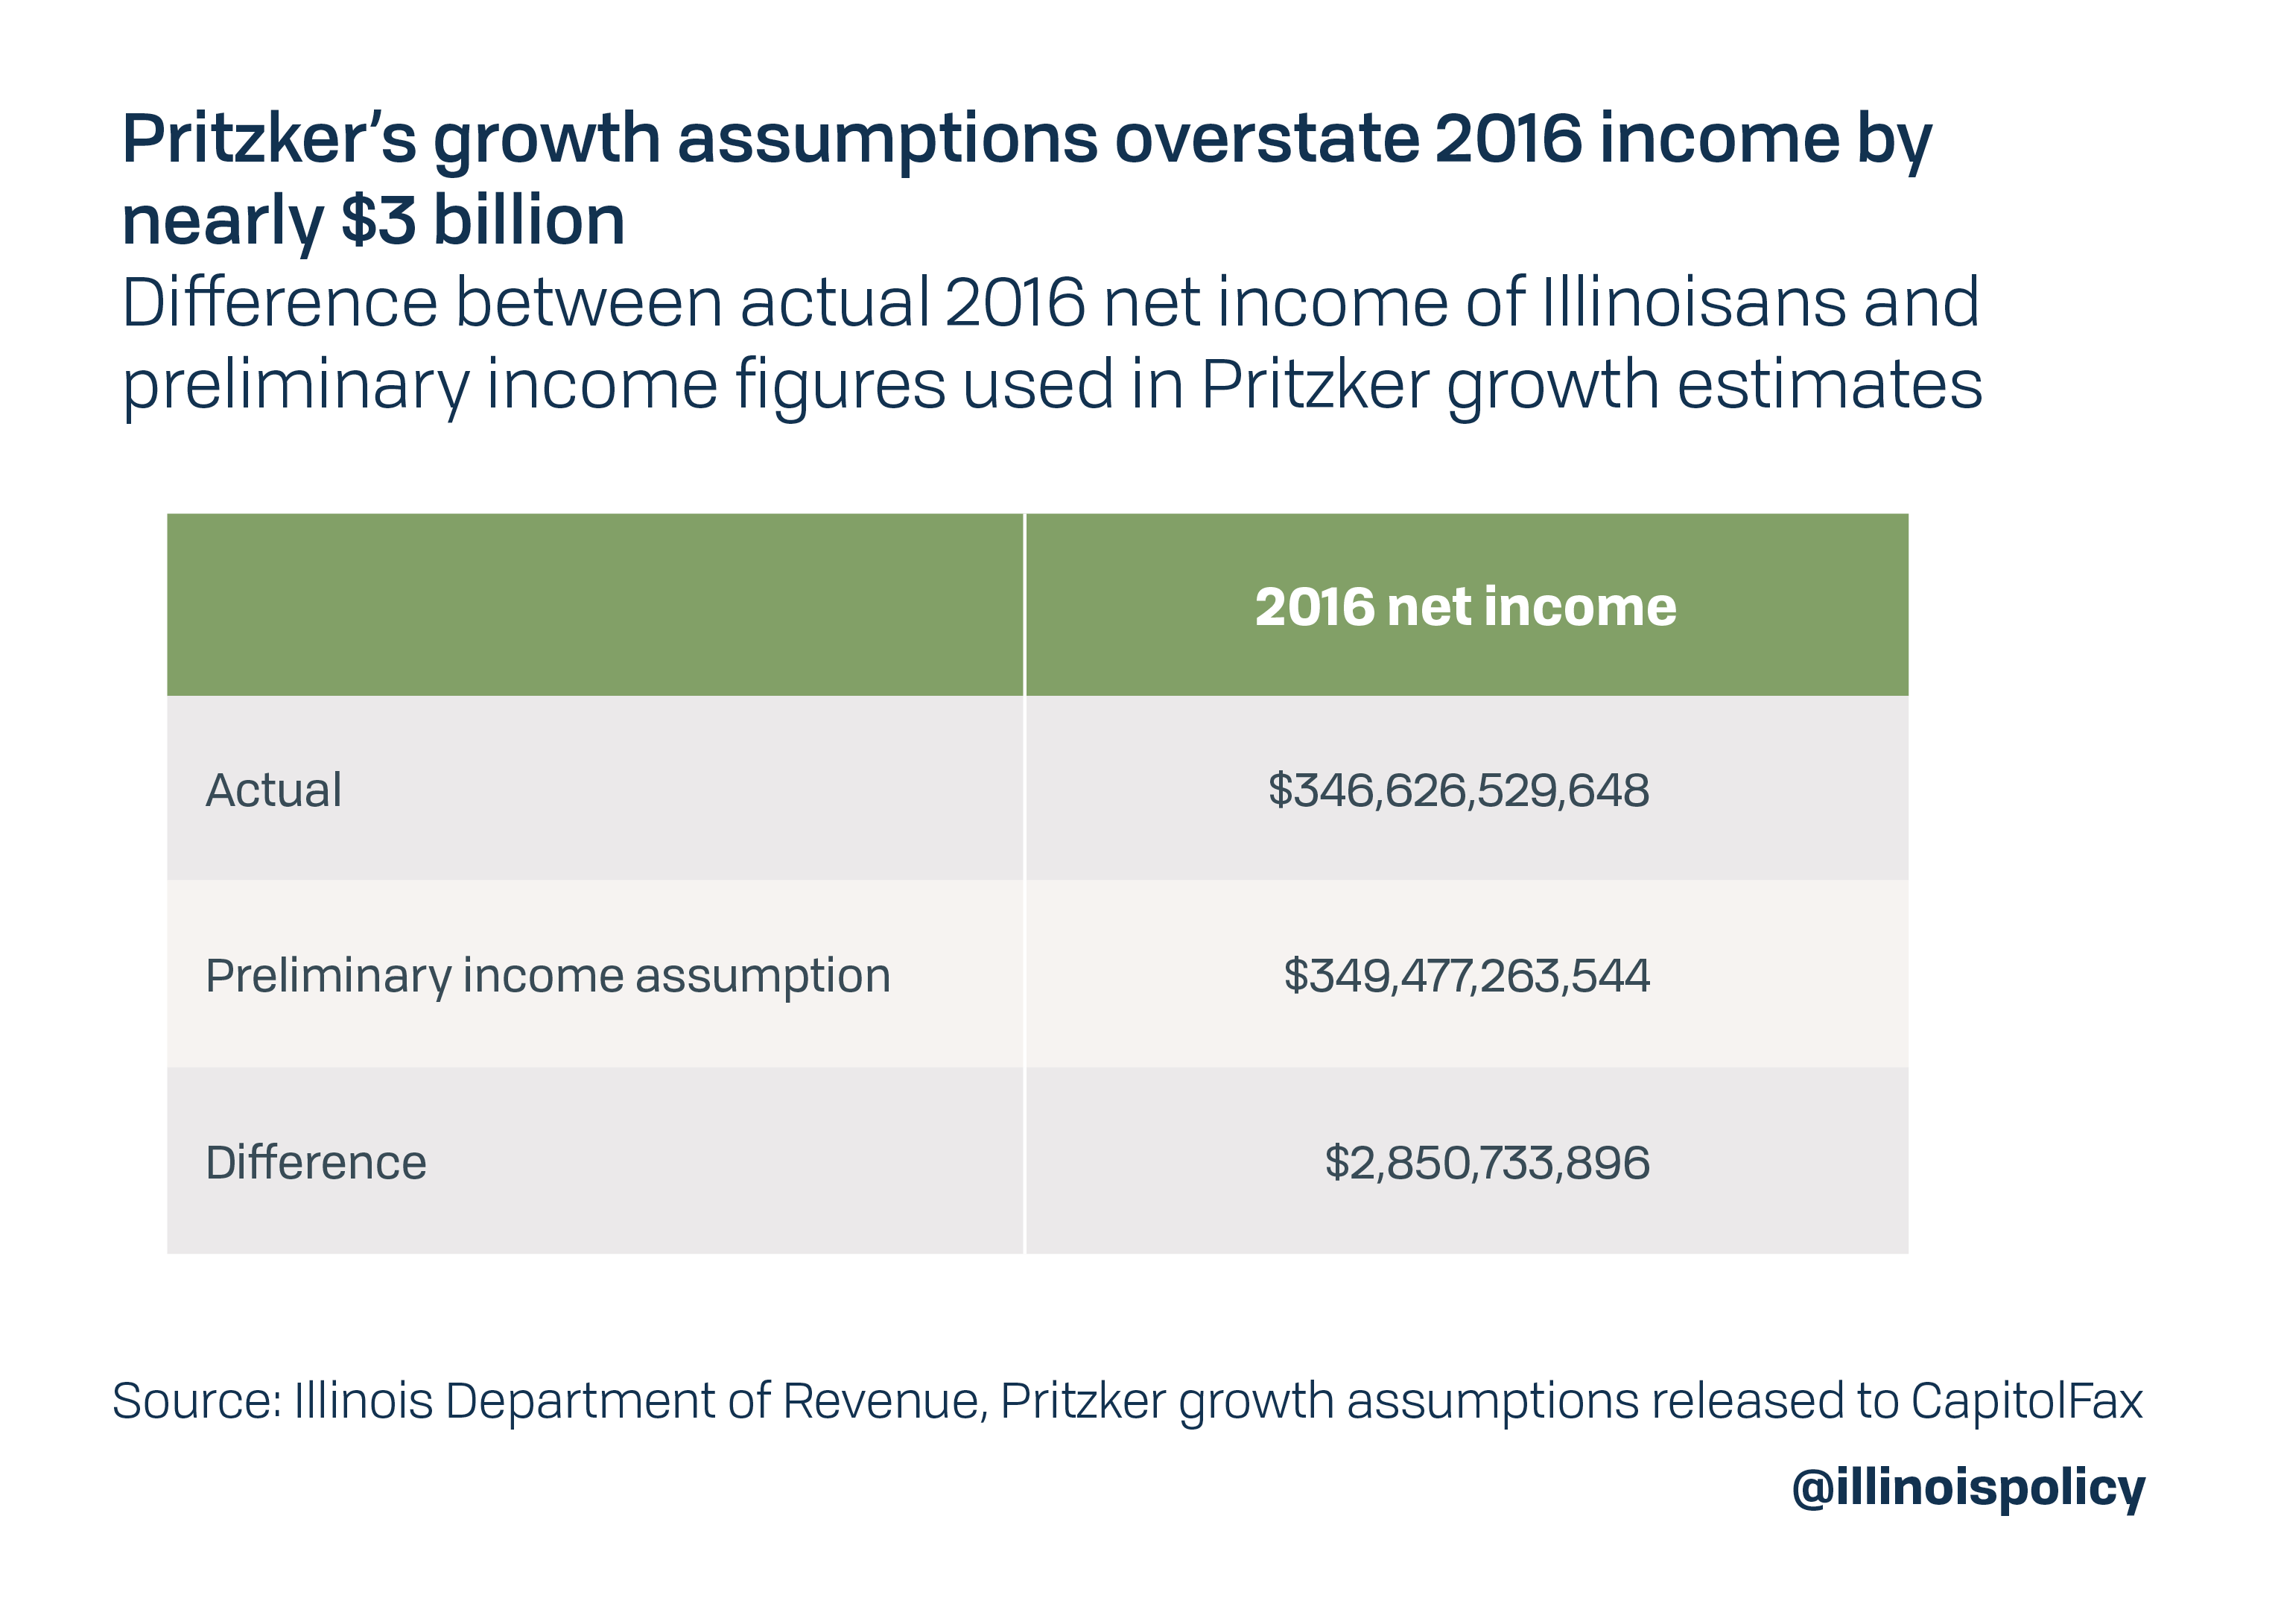 Pritzker's growth assumptions overstate 2016 income by nearly $3 billion